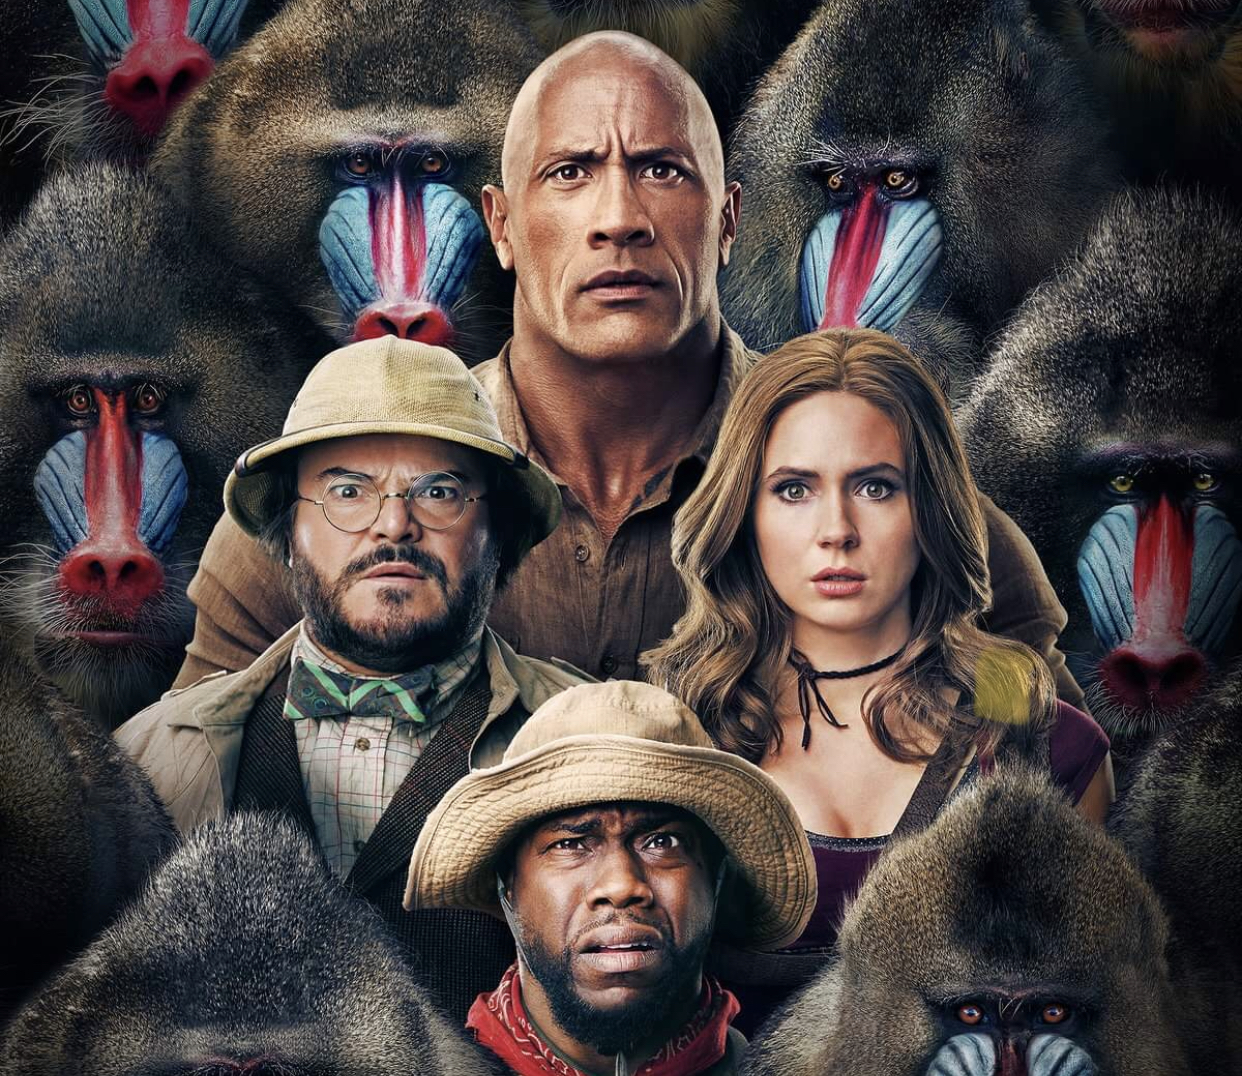 Jumanji: The Next Level Looks To Rake In $40 Million Its Opening Weekend